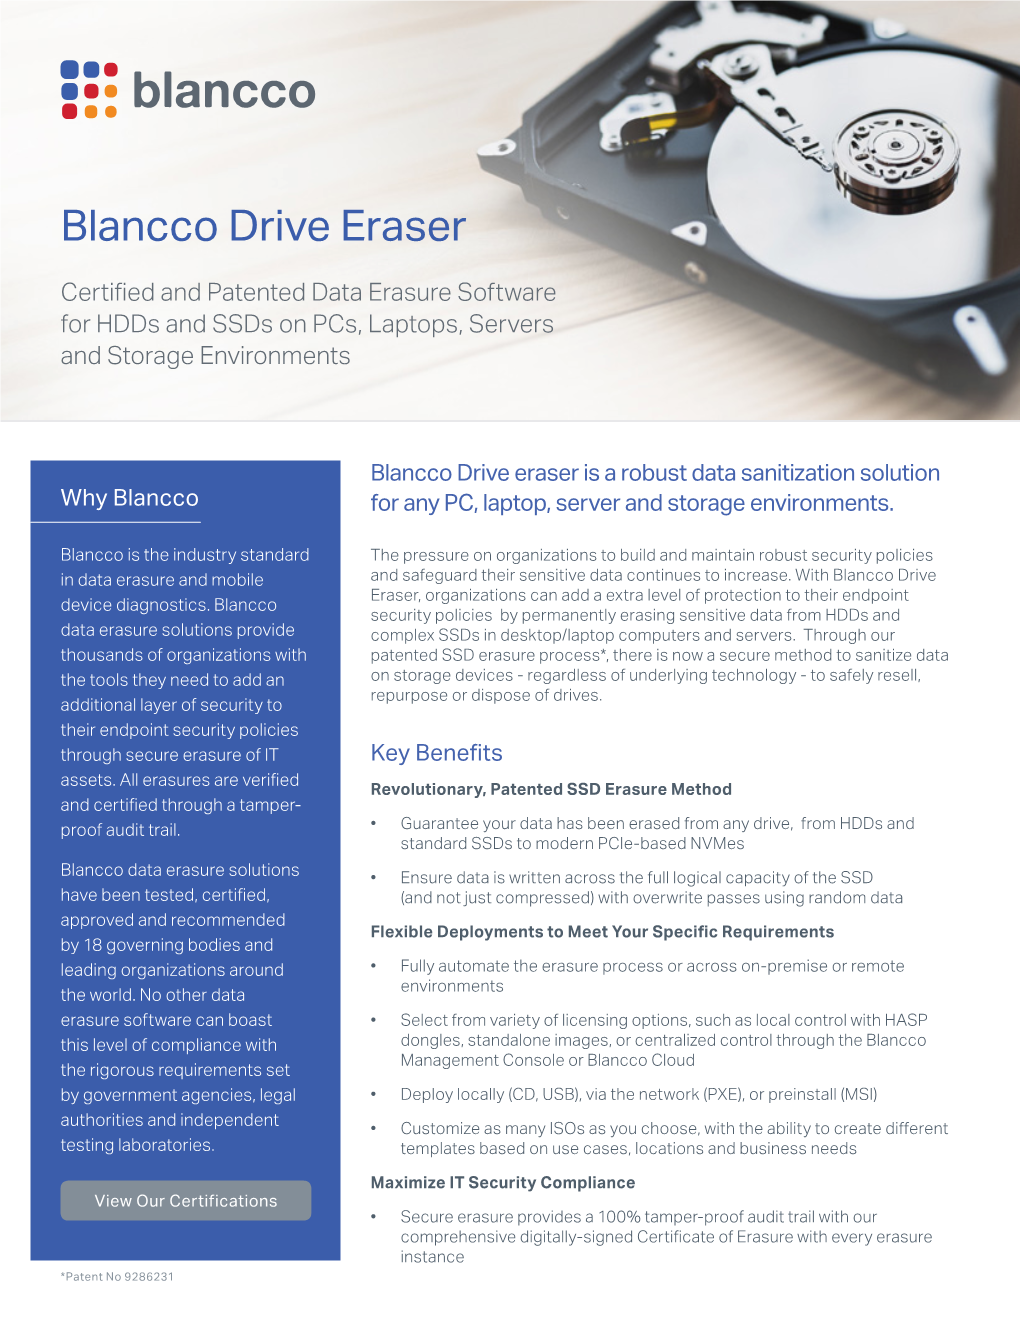 Blancco Drive Eraser Certified and Patented Data Erasure Software for Hdds and Ssds on Pcs, Laptops, Servers and Storage Environments